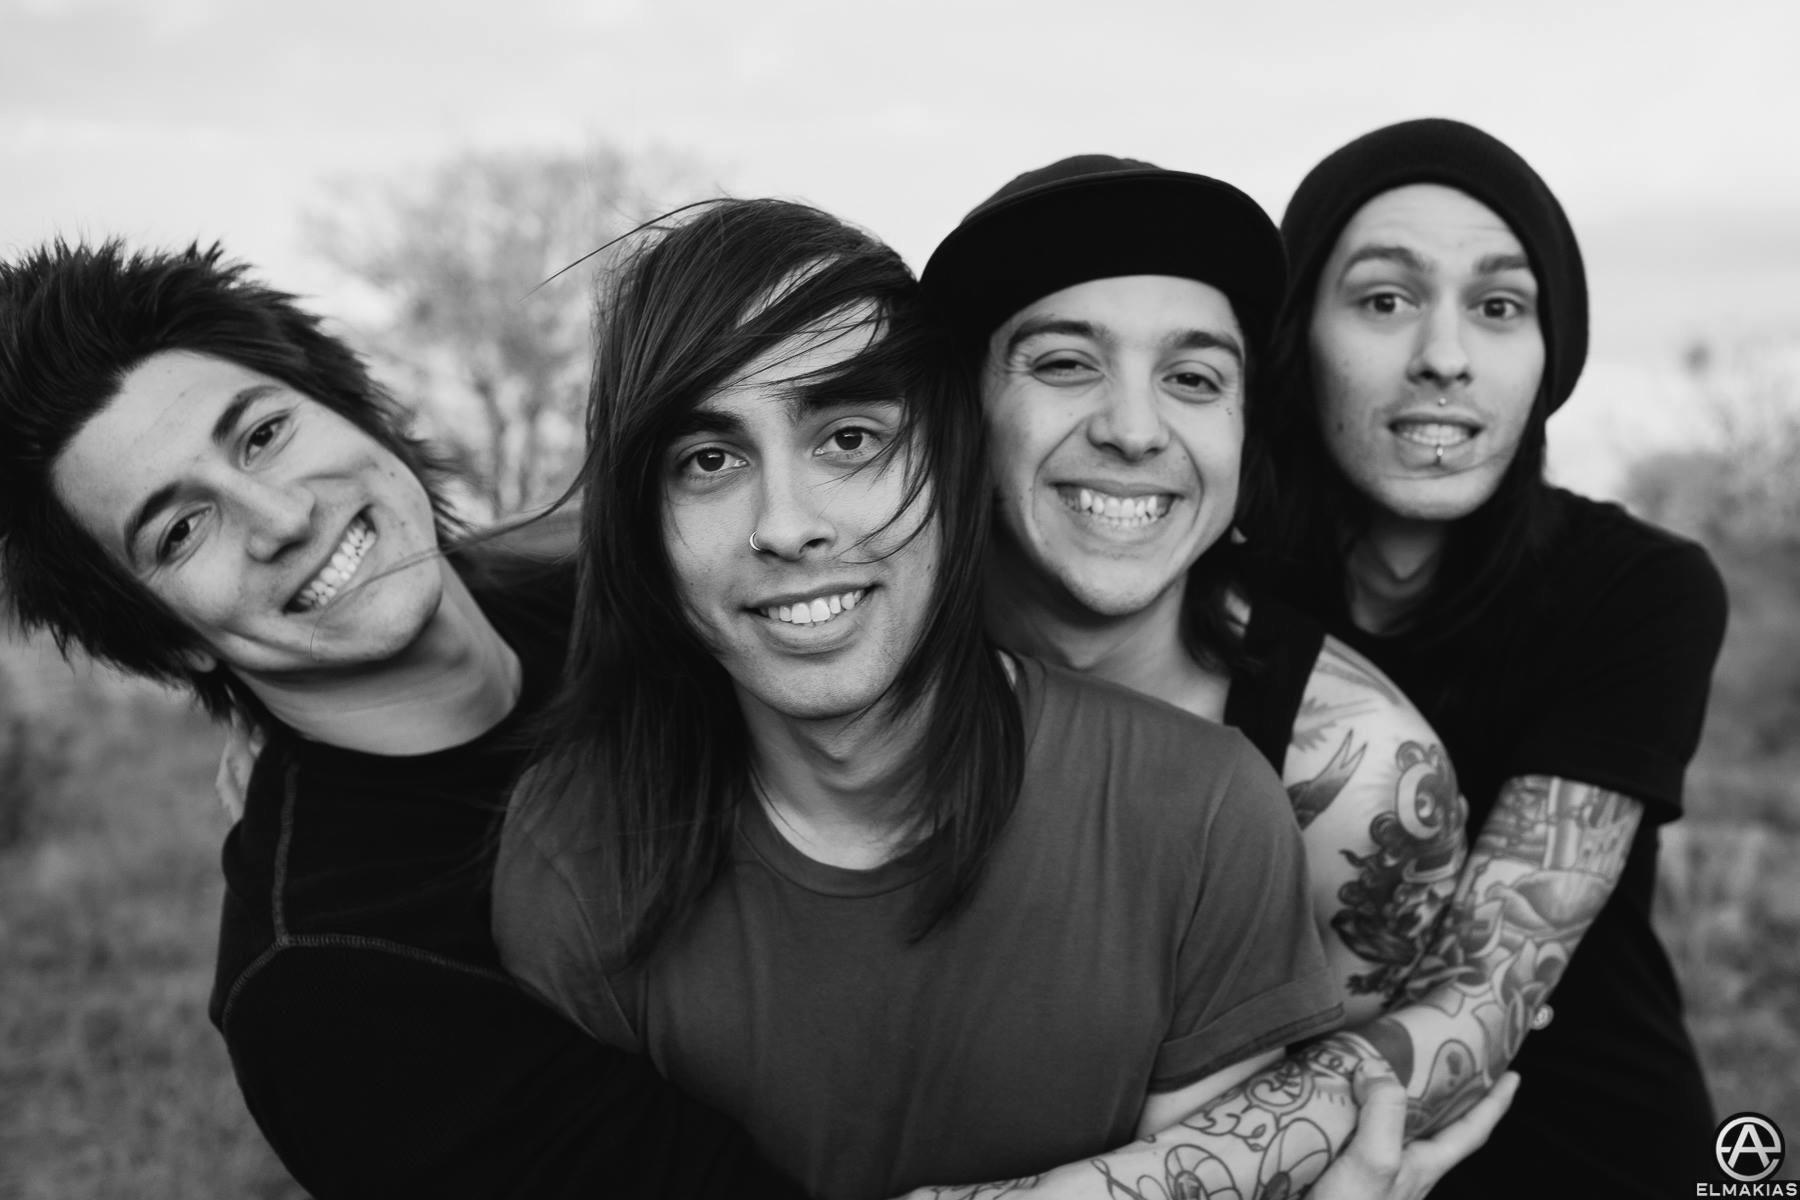 pierce the veil collide with the sky wallpaper iphone